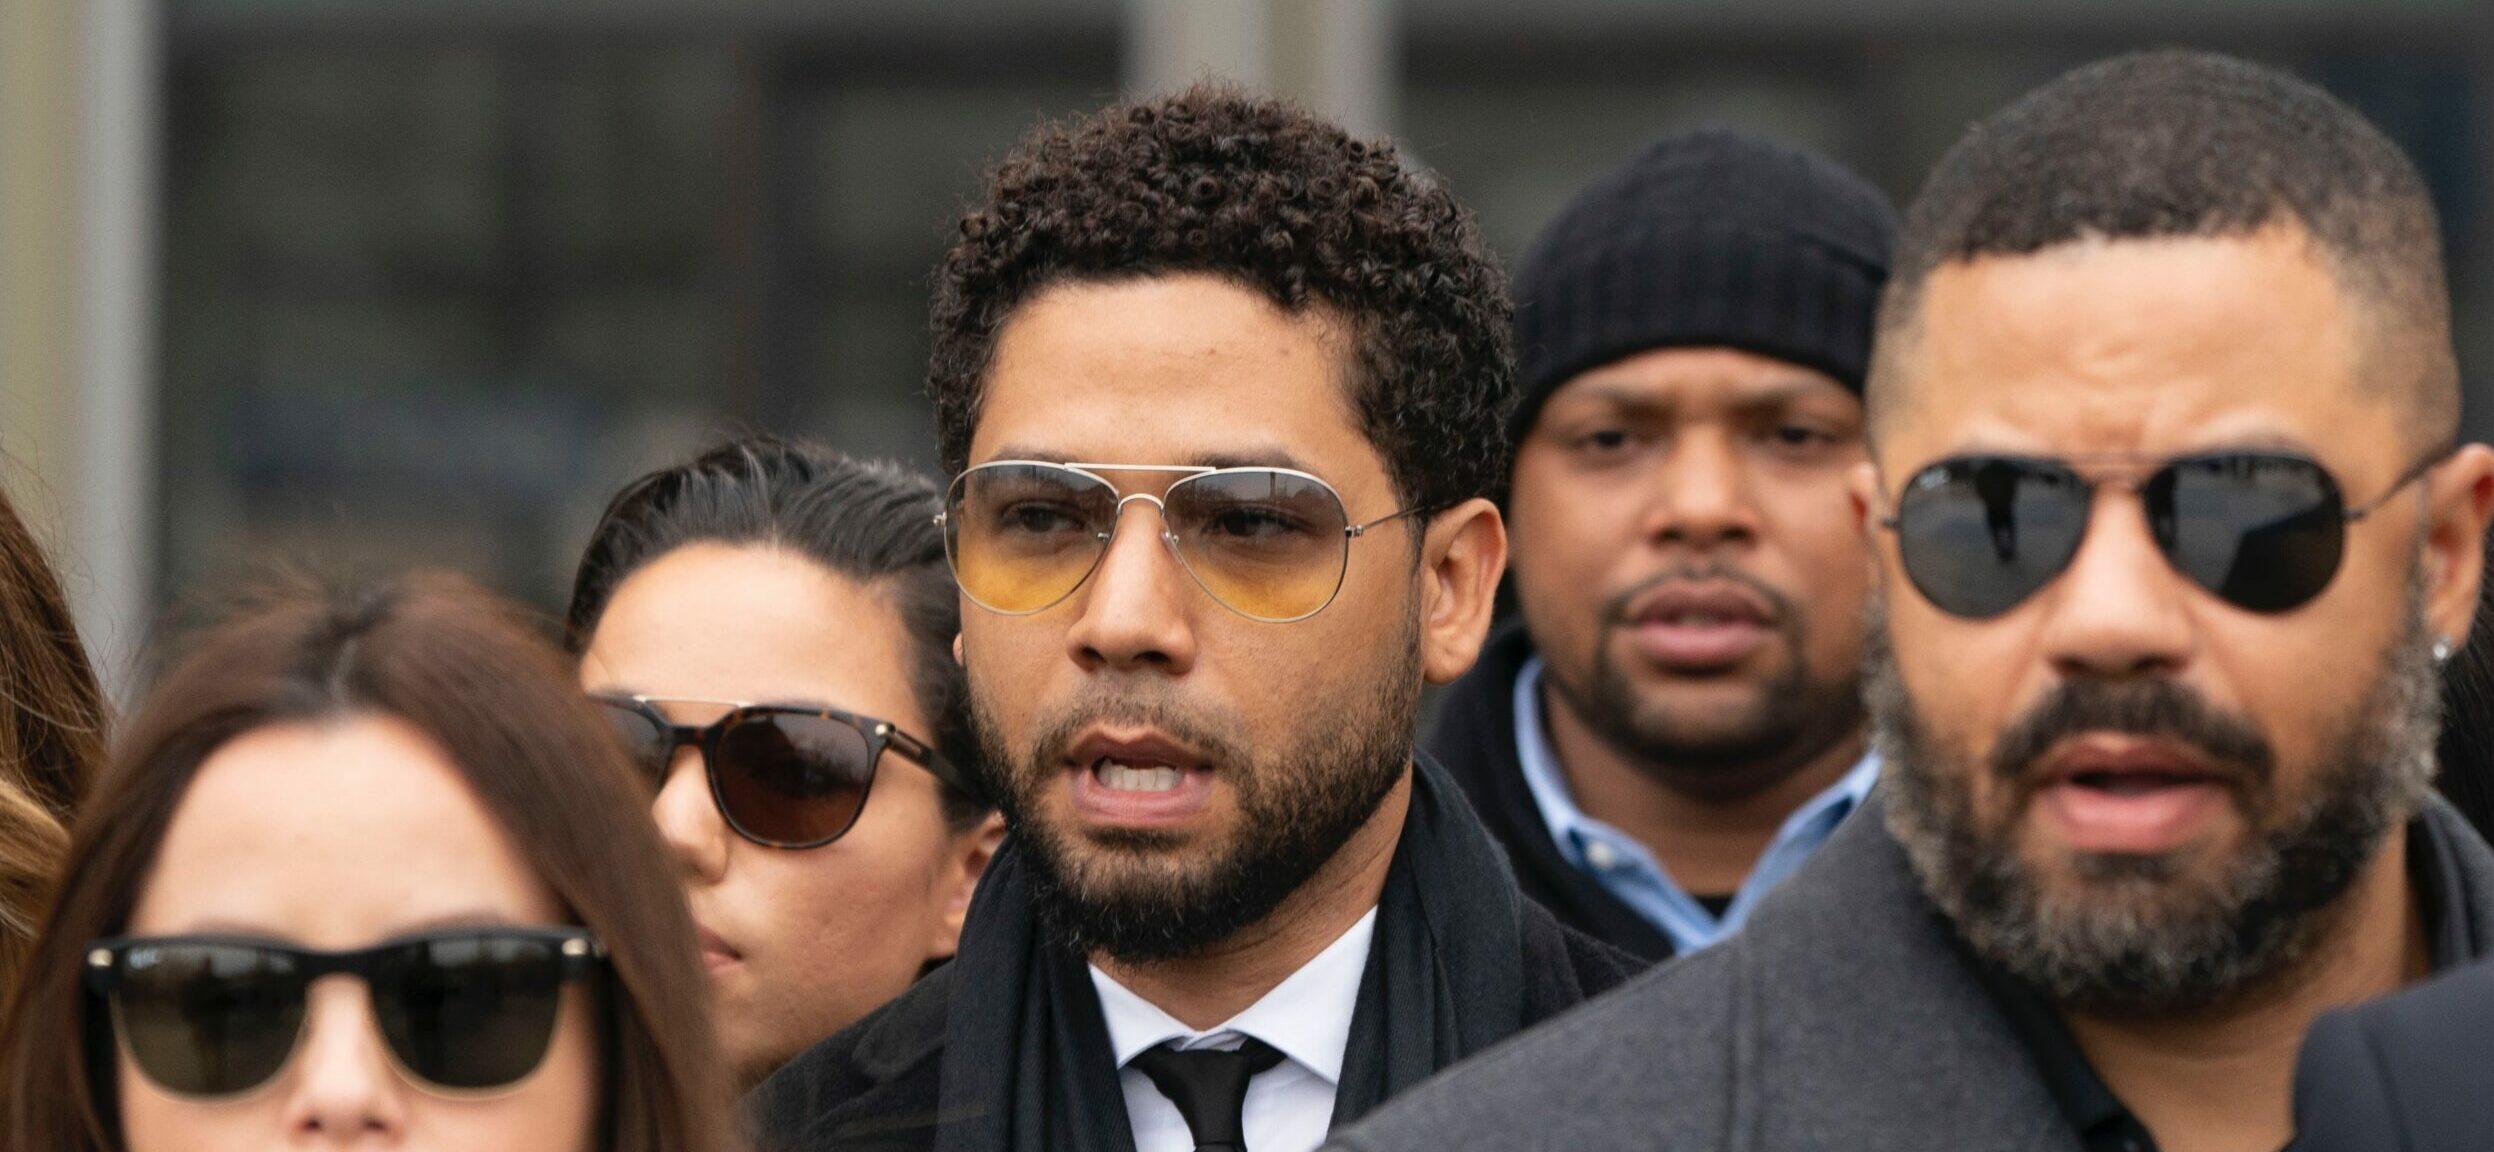 Jussie Smollett Appeals Alleged 2019 Hate Crime Hoax Conviction